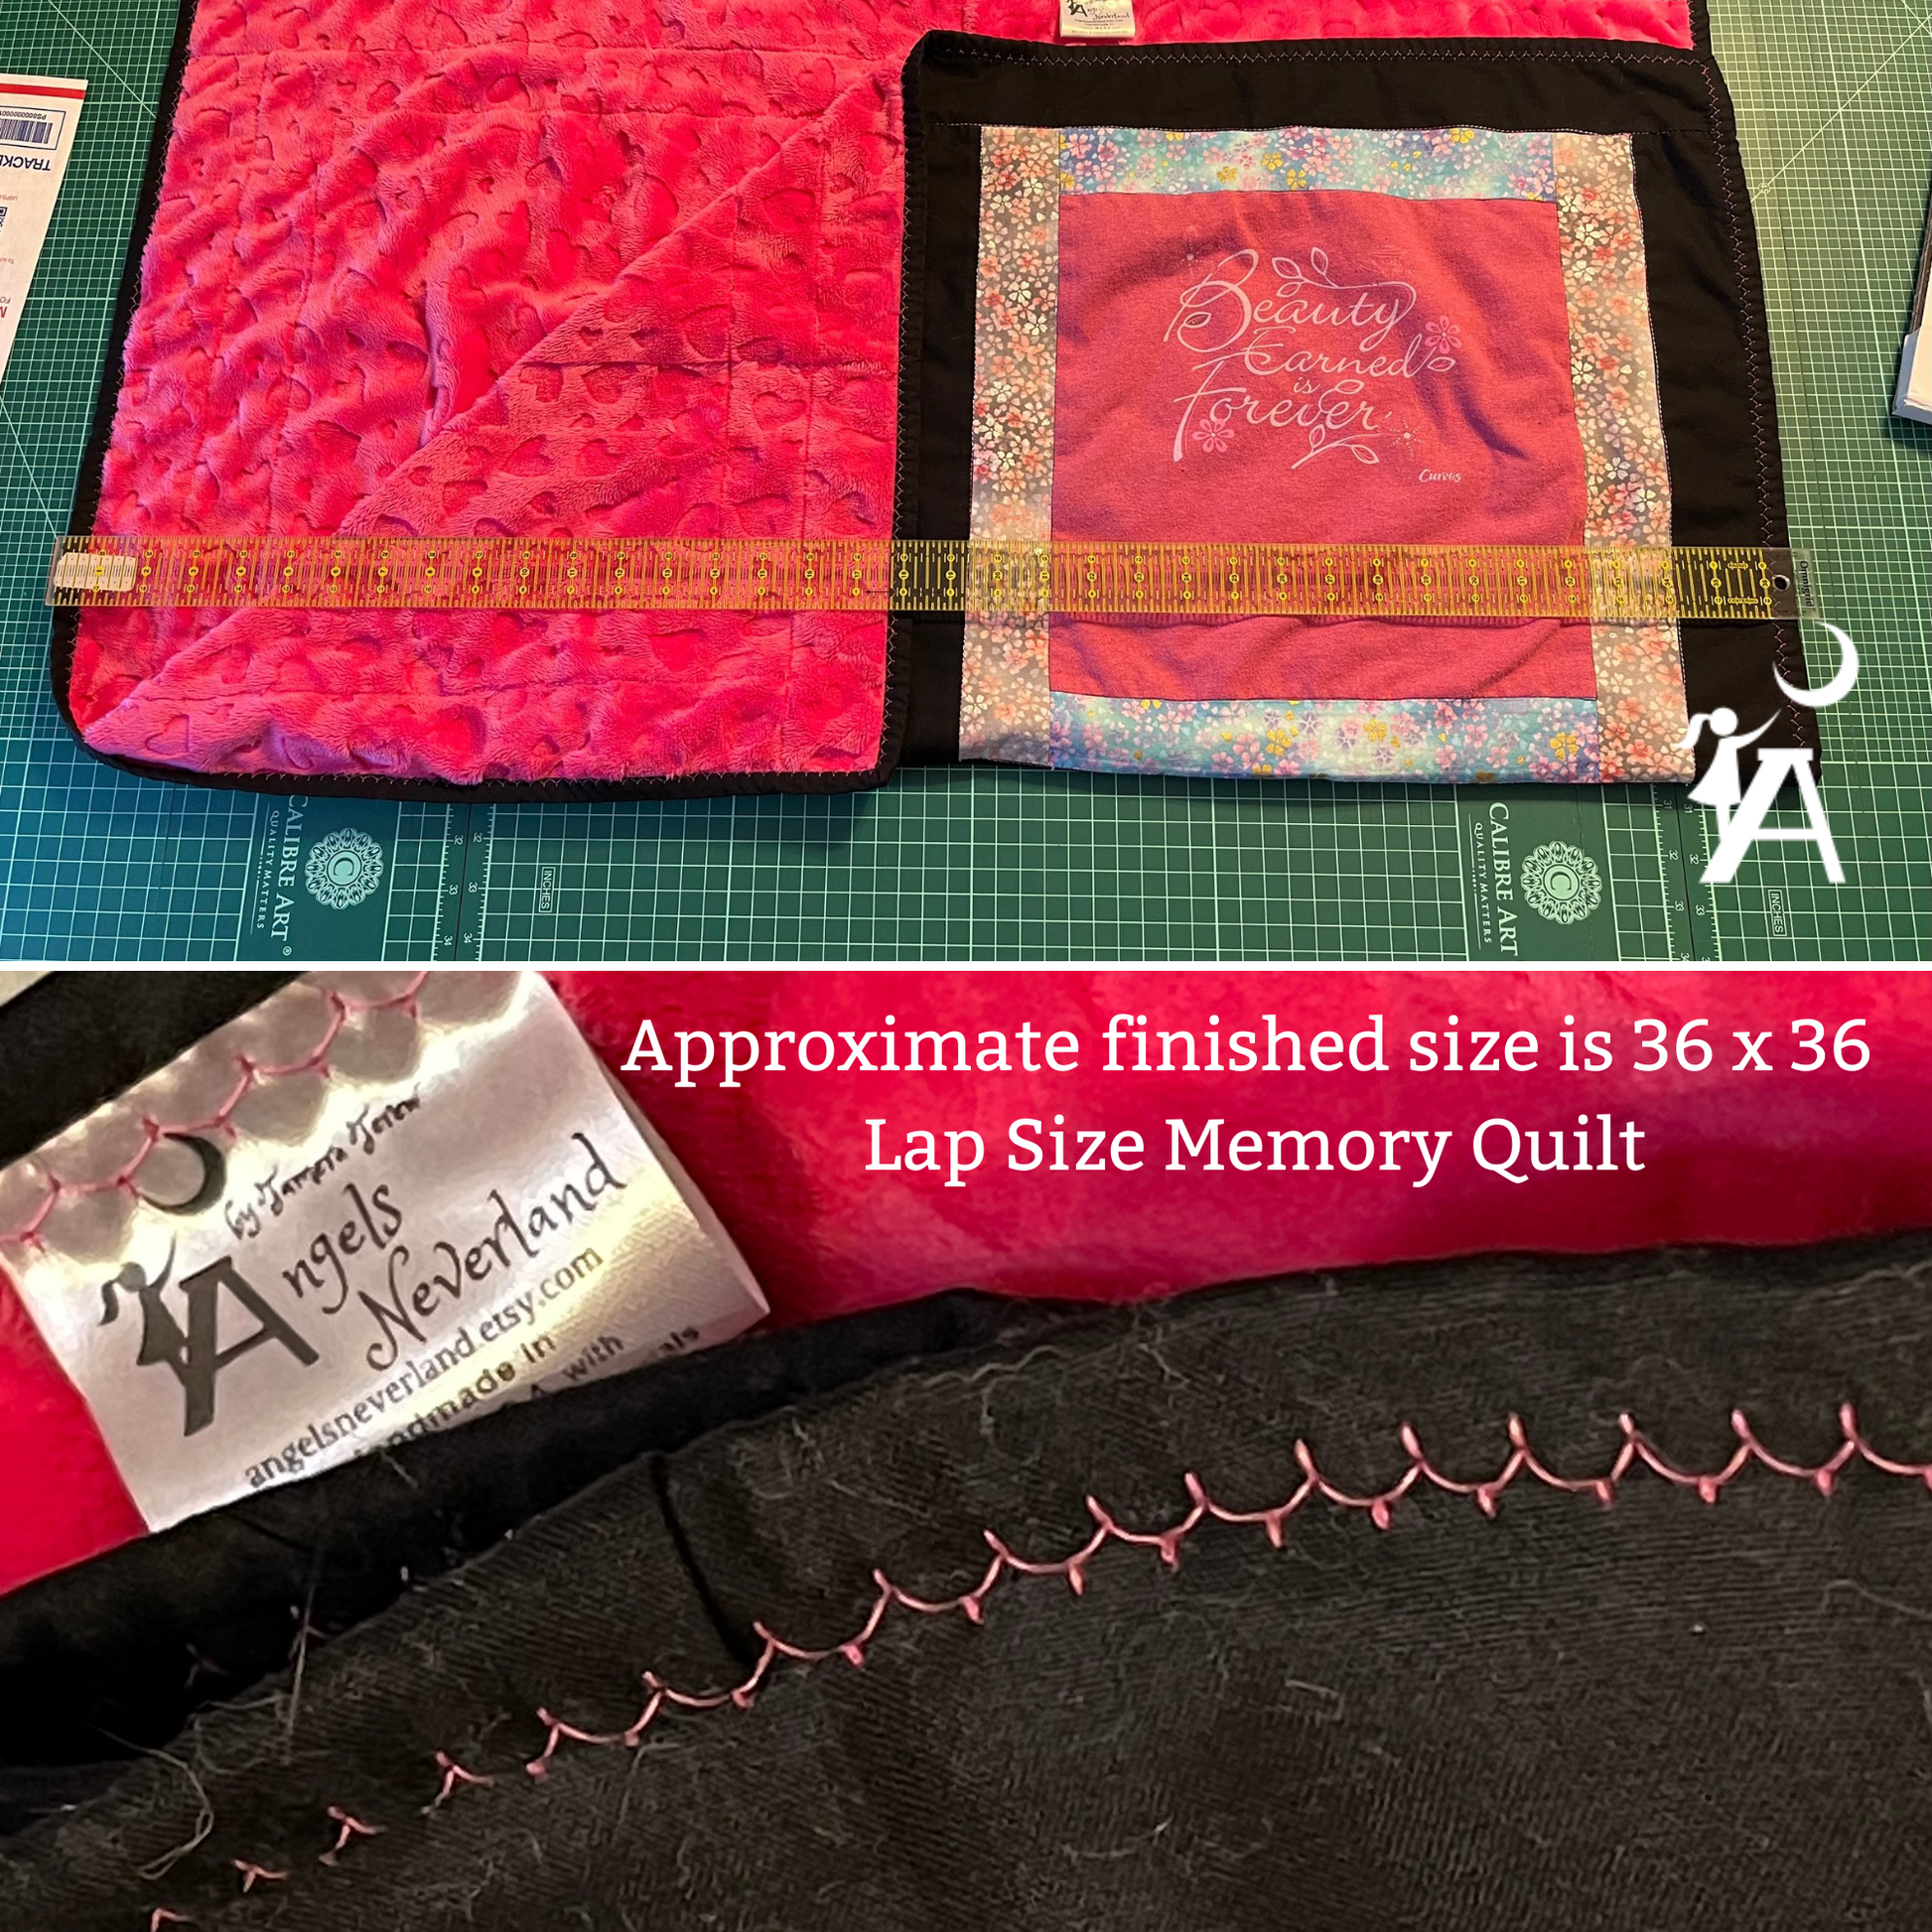 Angels Neverland Quilts & Comforters Custom T-shirt Memory Quilt lap size with 4 T-shirts, Heirloom T-shirt Quilt, Bereavement gift, memory blanket